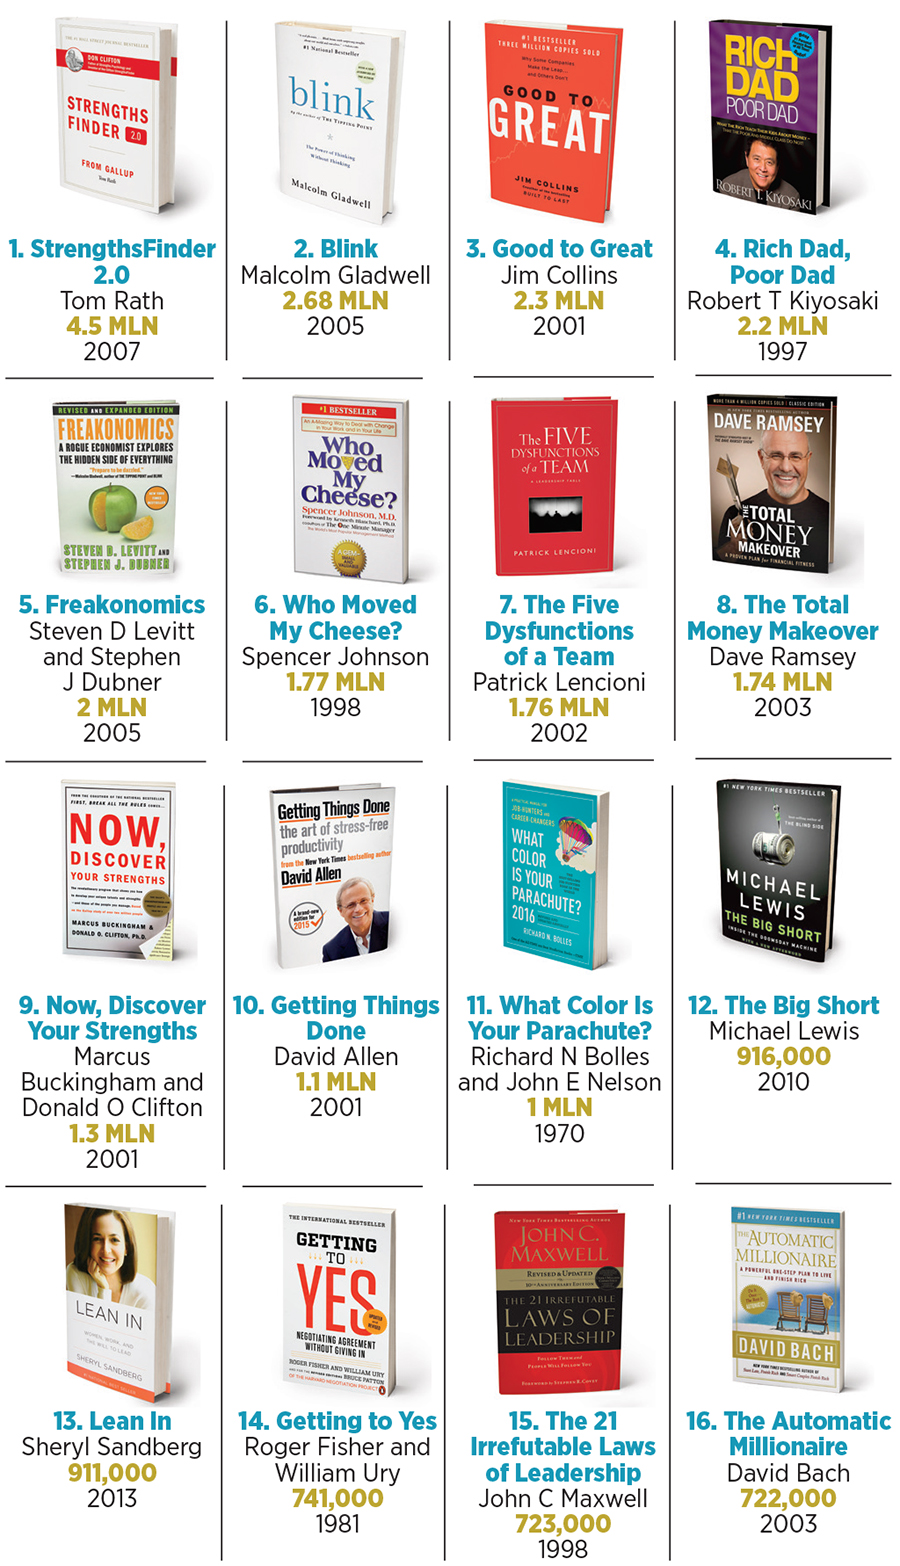 The bestselling business books of all time